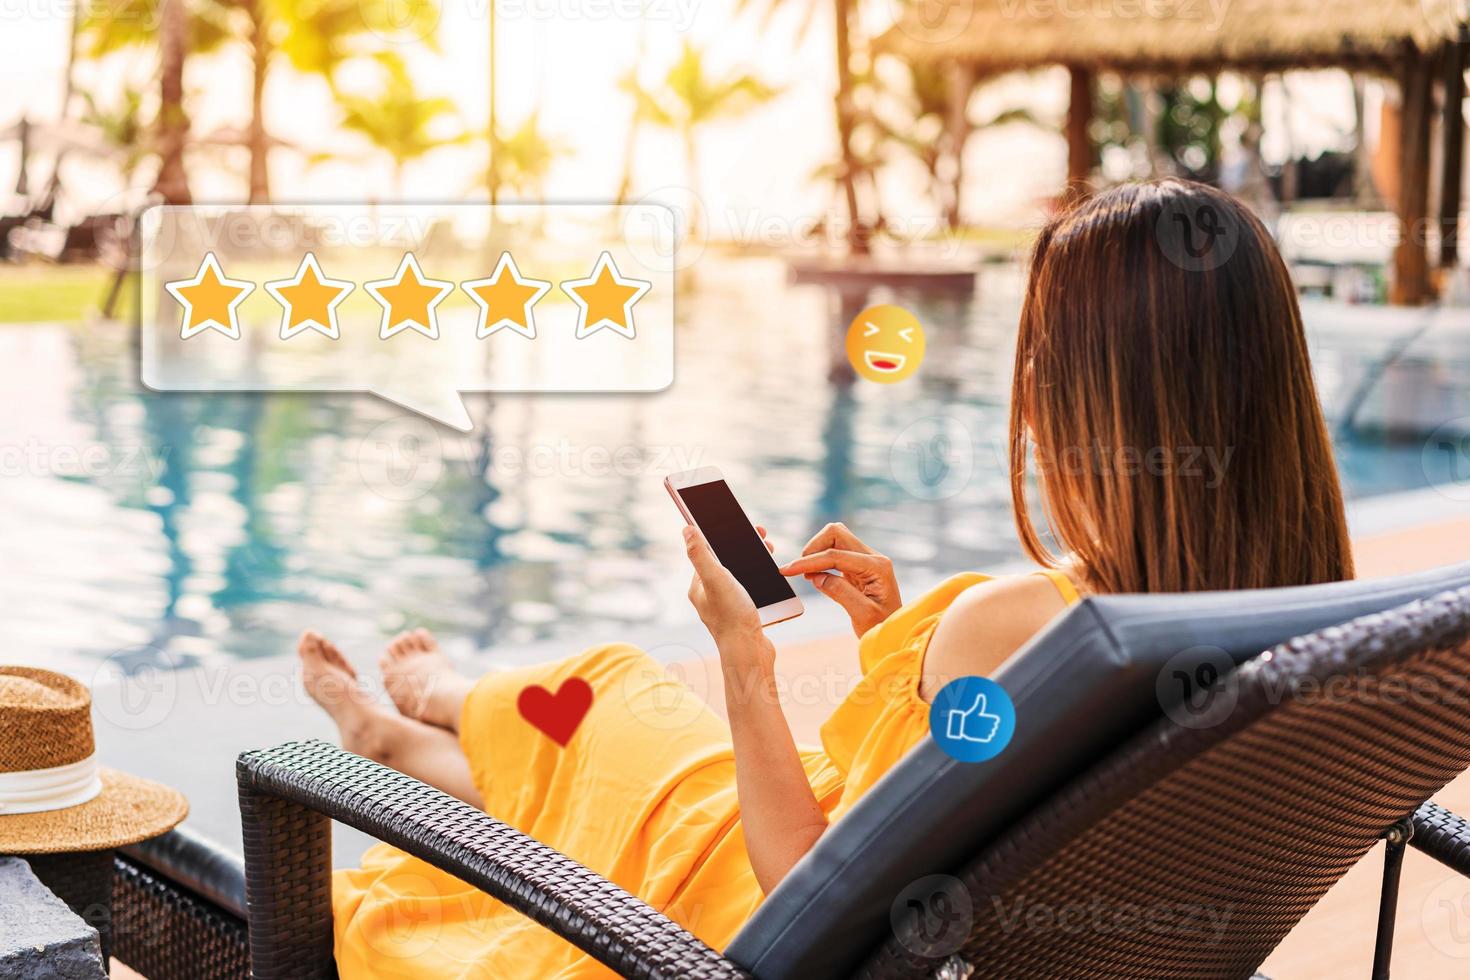 Young woman relaxing at resort pool and using smartphone to give a five-star satisfaction rating of the hotel's service and rooms on social media. Travel lifestyle concept photo